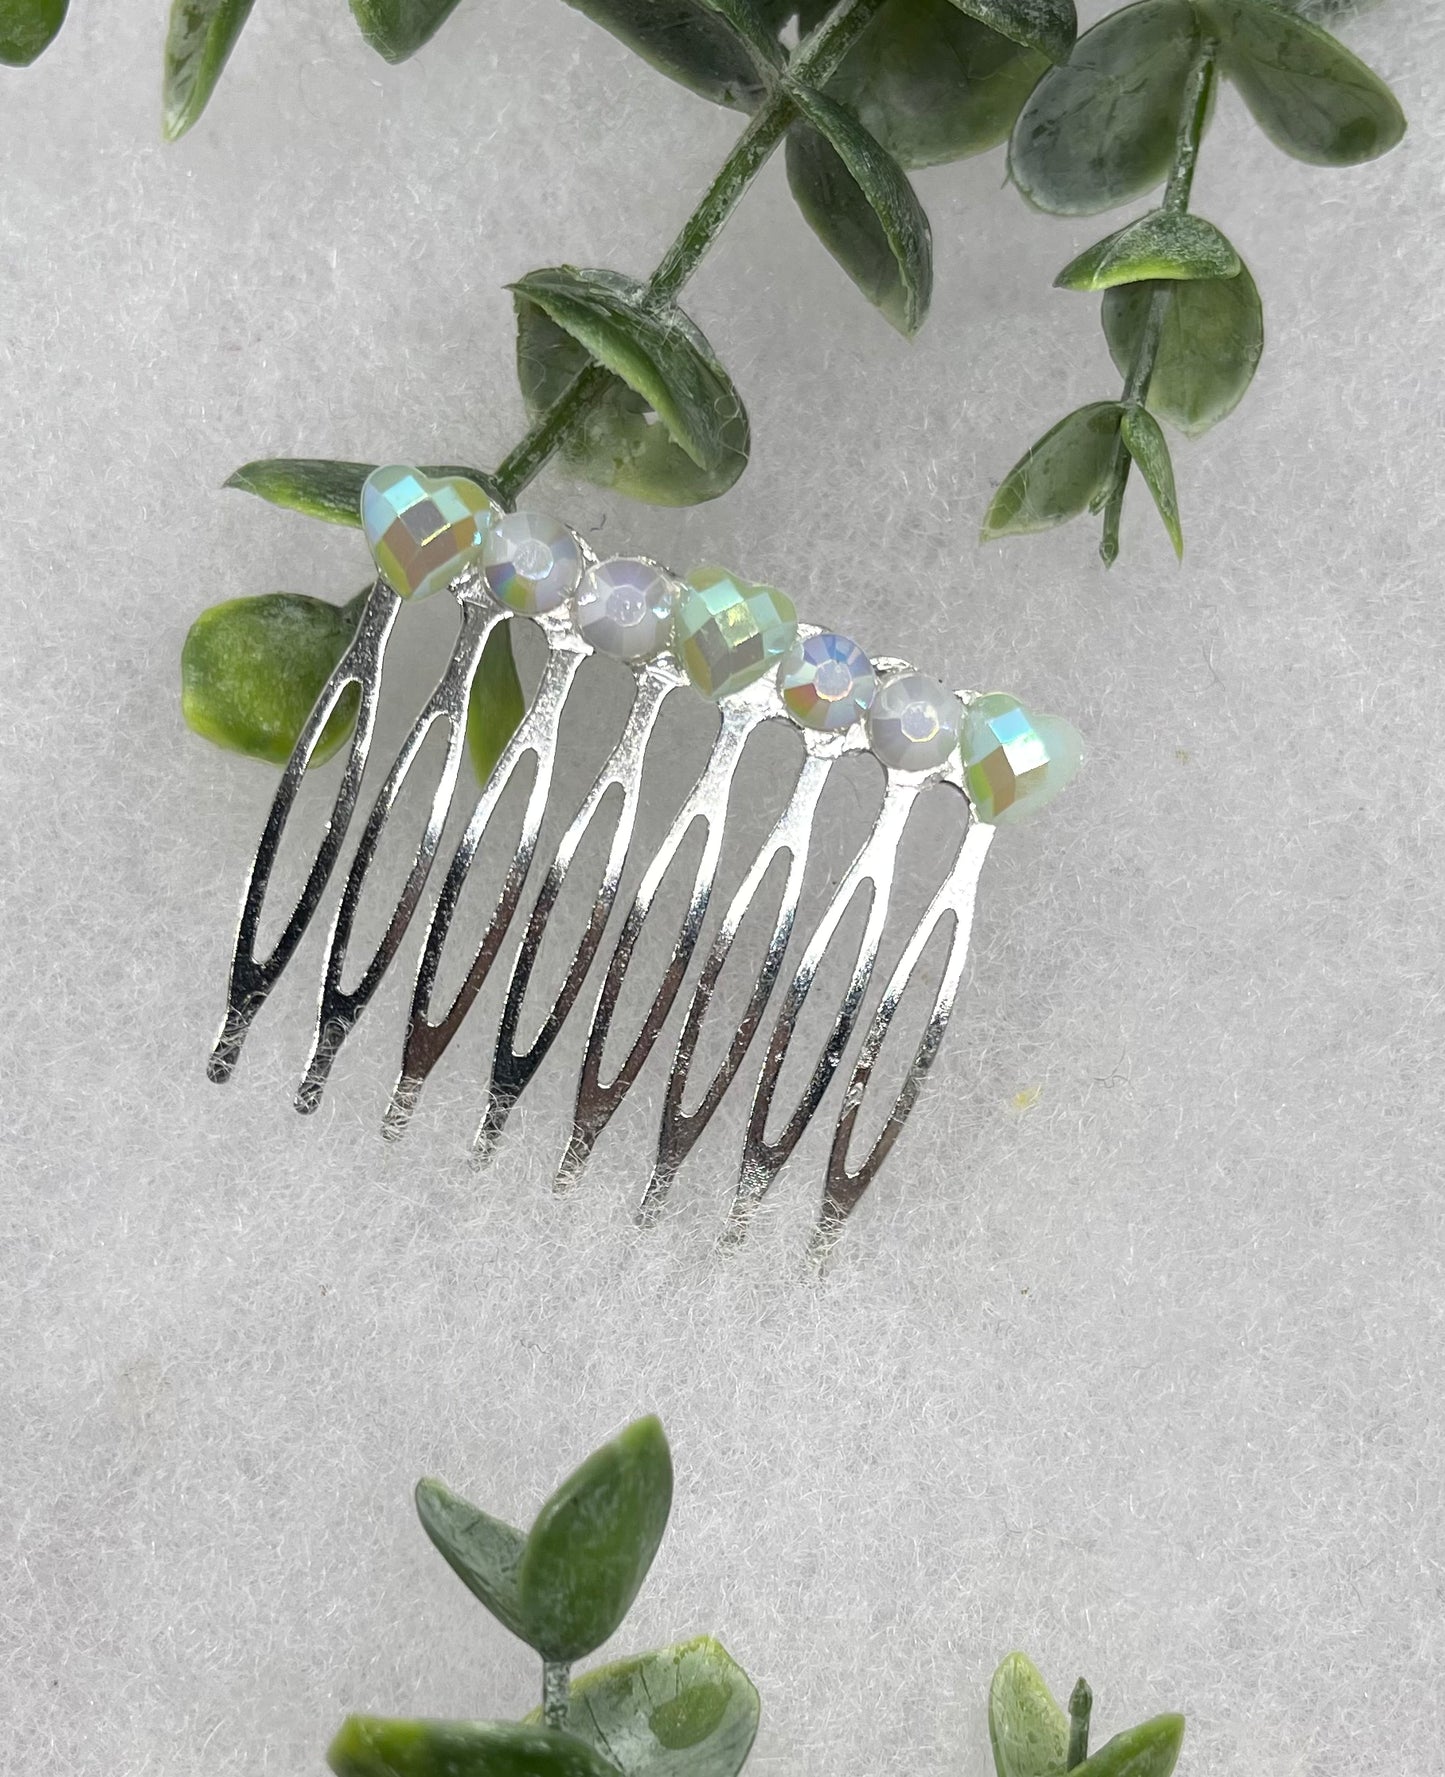 Heart iridescent faux Crystal Rhinestone 2.0” silver tone Metal side Comb bridal accents handmade by hairdazzzel wedding accessory